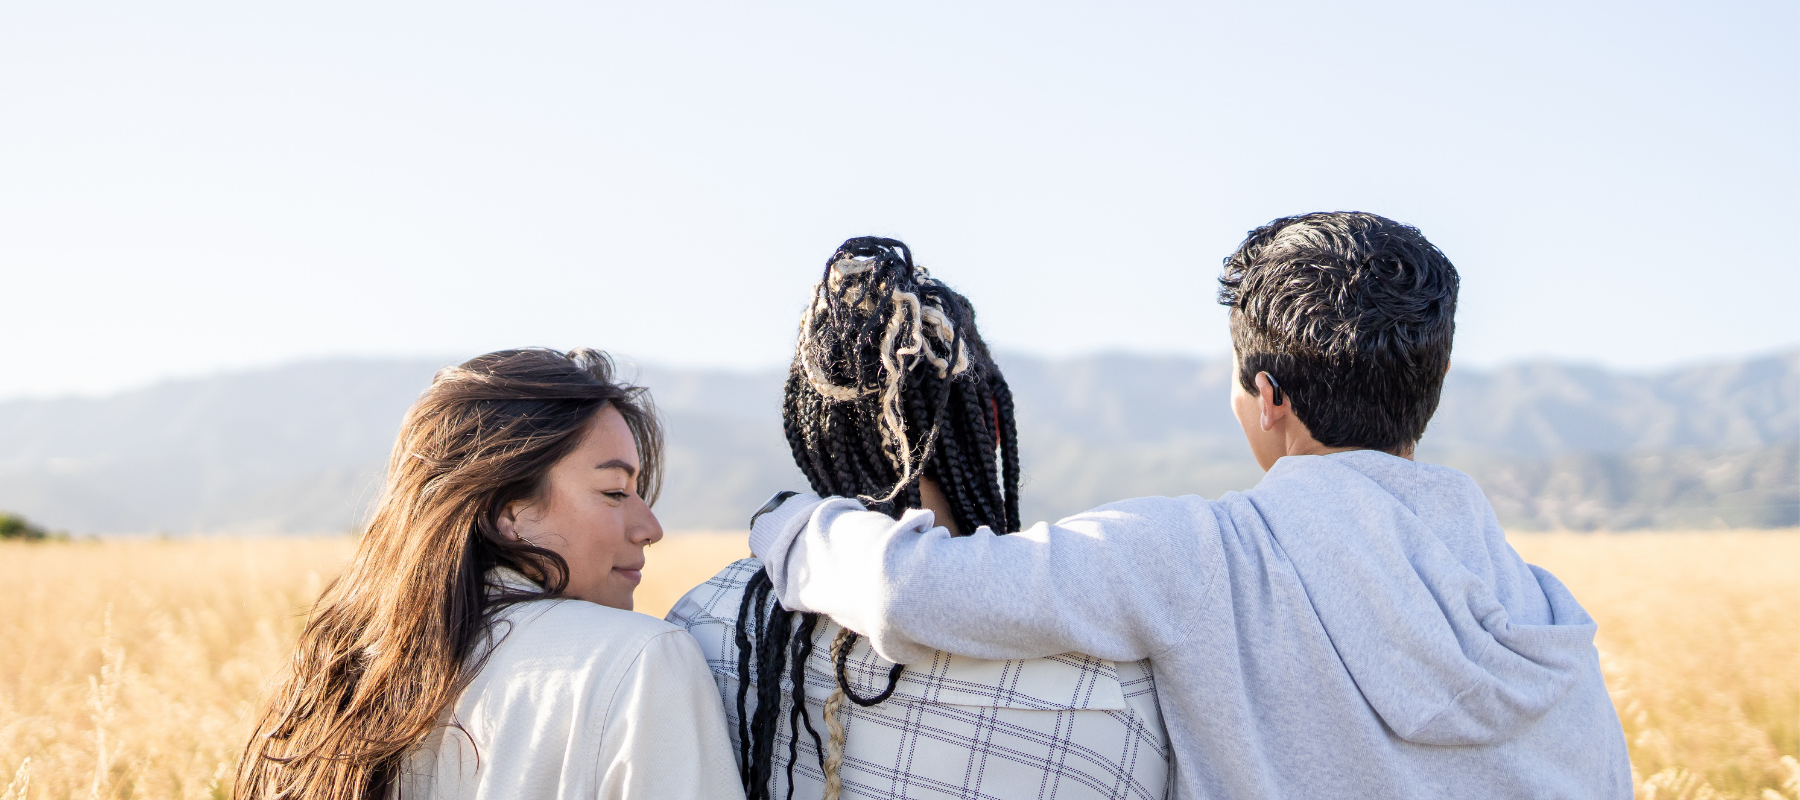 Three people of different races stand closely together in a comfortable embrace in a beautiful open field of dried grasses with mountains in the distance.